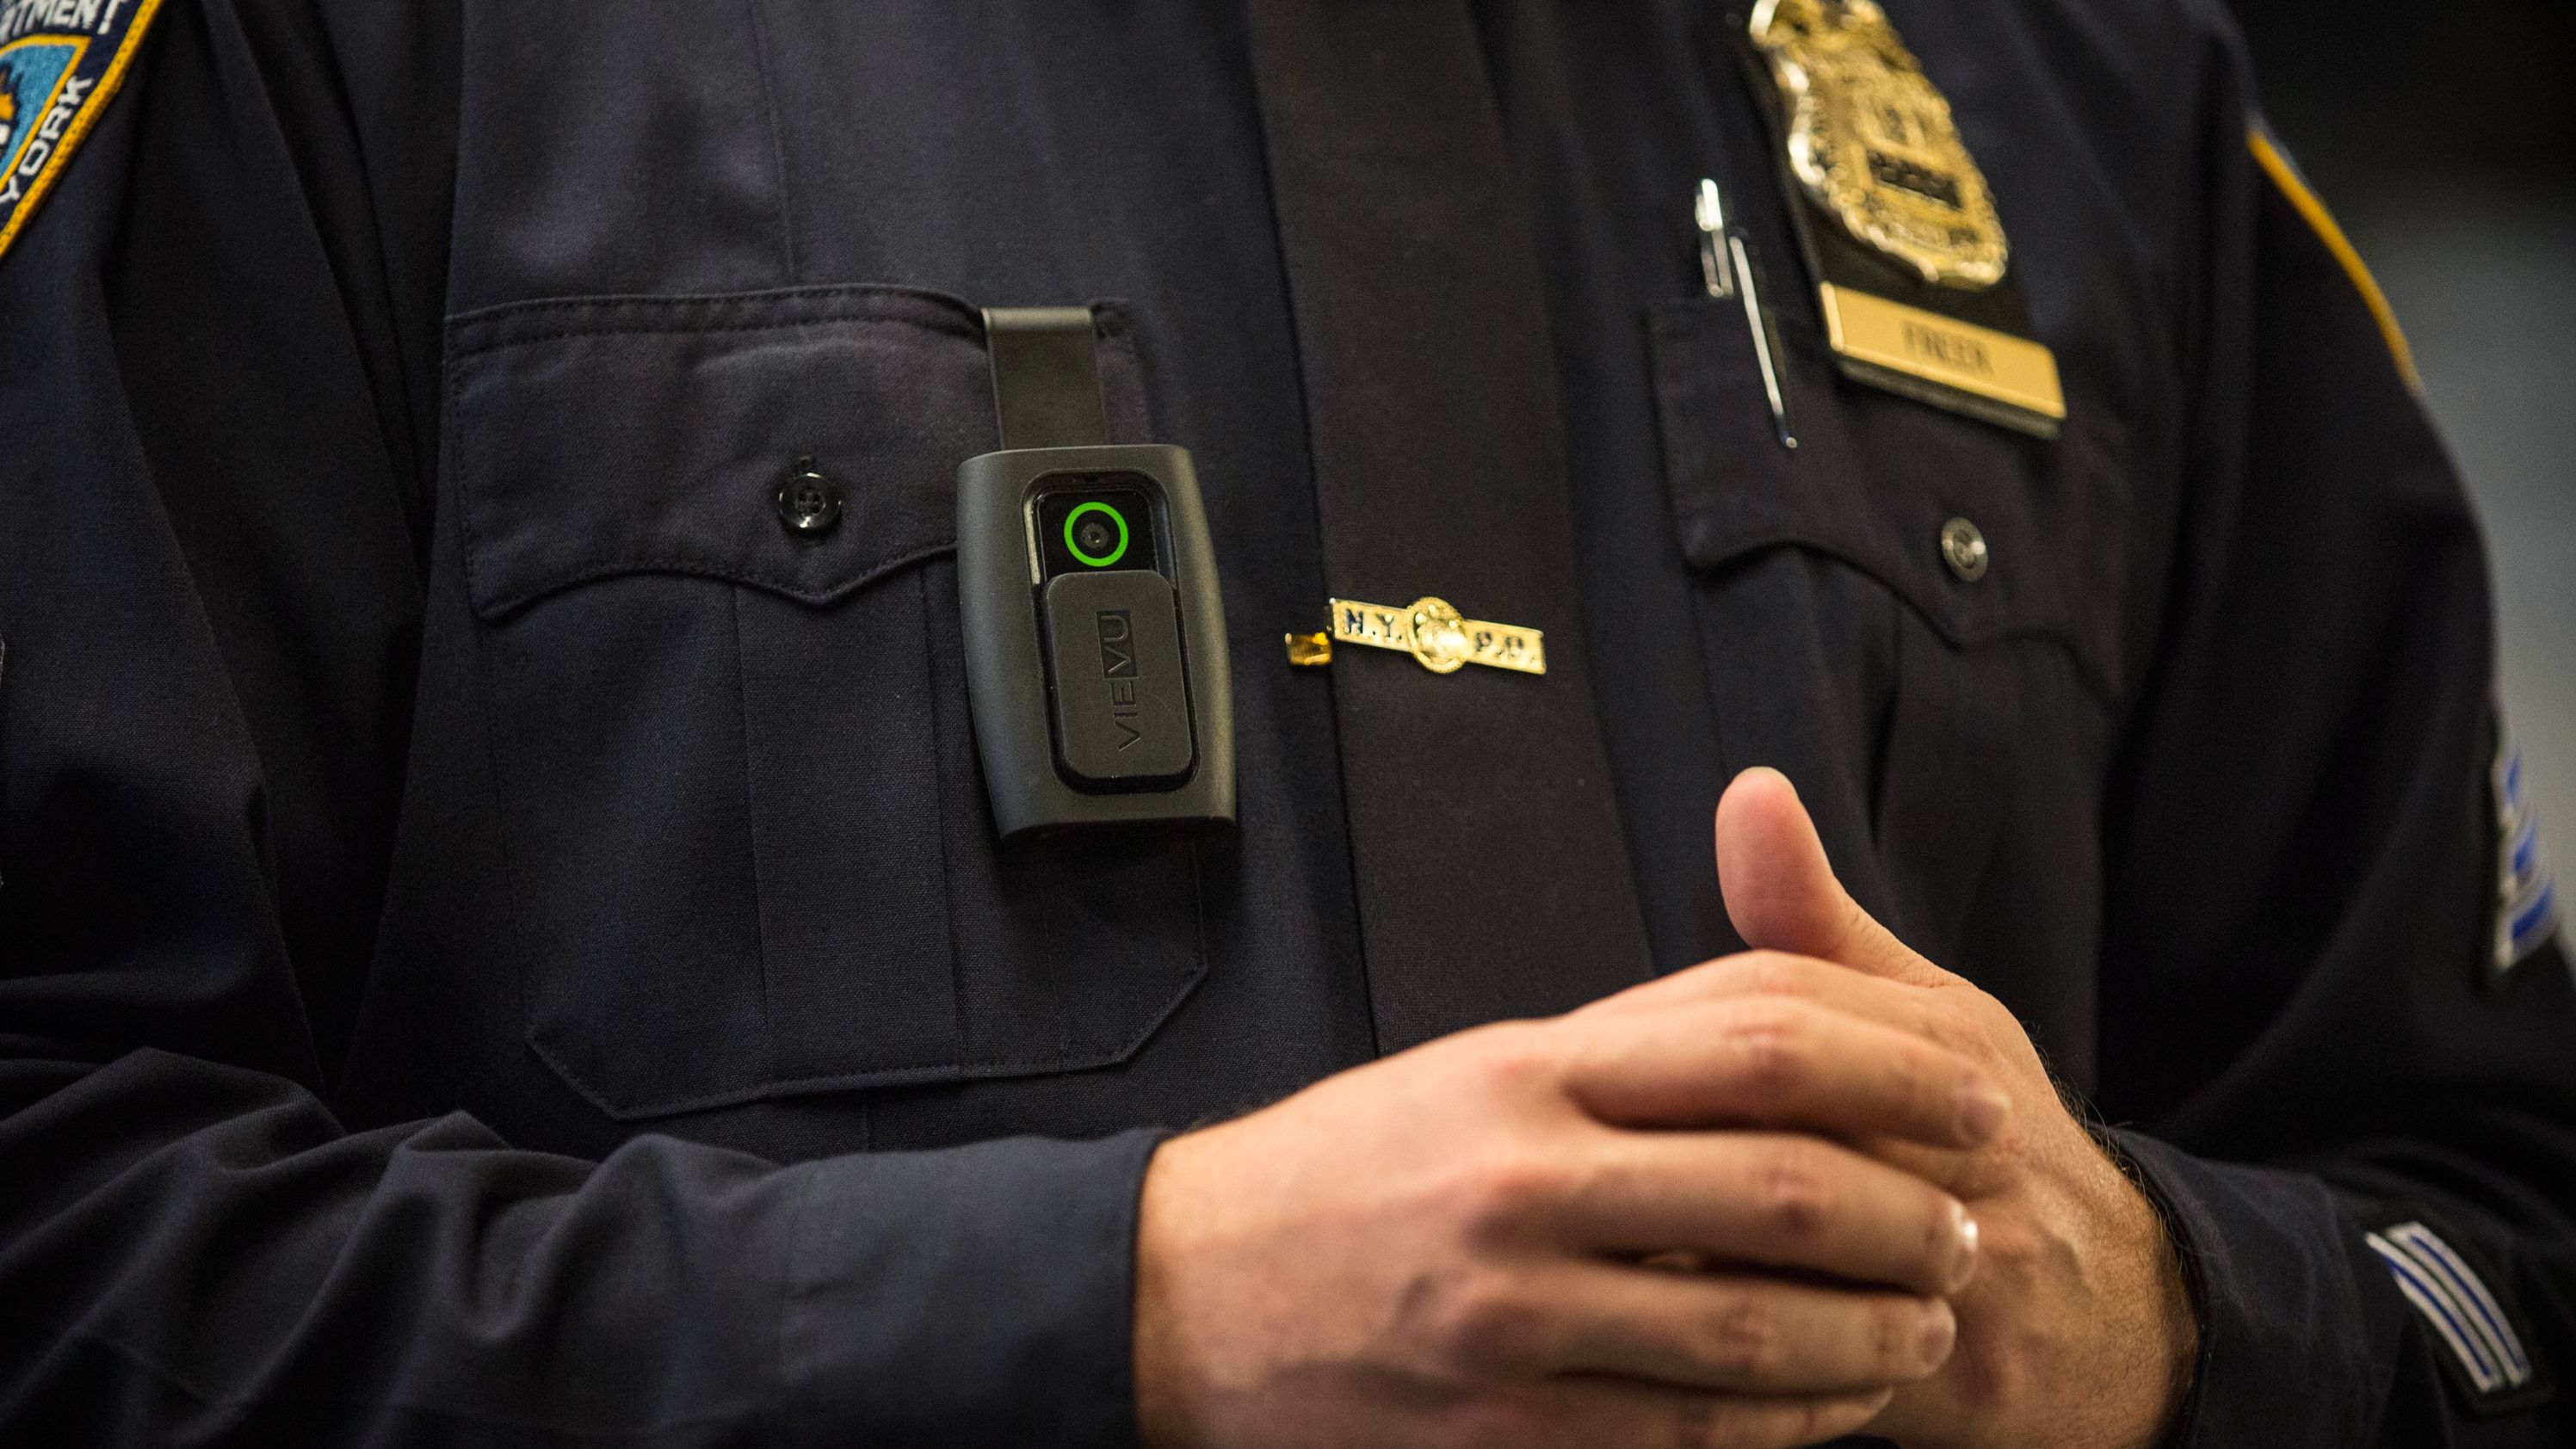 NYPD Sgt. Joseph Freer demonstrates how to use a body camera during a press conference.